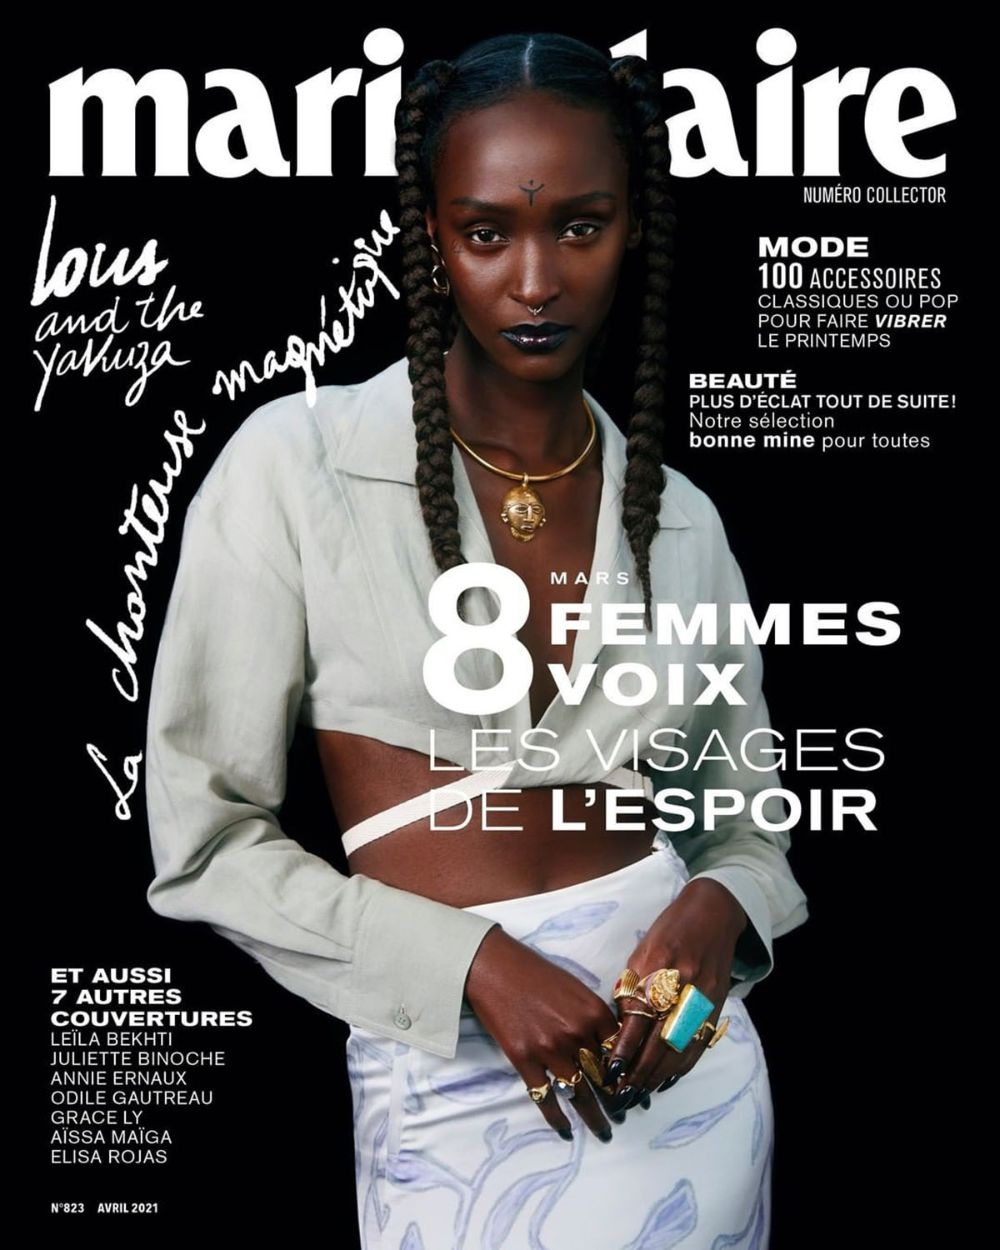 Lous and the Yakuza Covers Marie Claire France April 2021. Clothing: Jacquemus leaves-pattern long skirt / Jacquemus La chemise Laurier cropped shirt